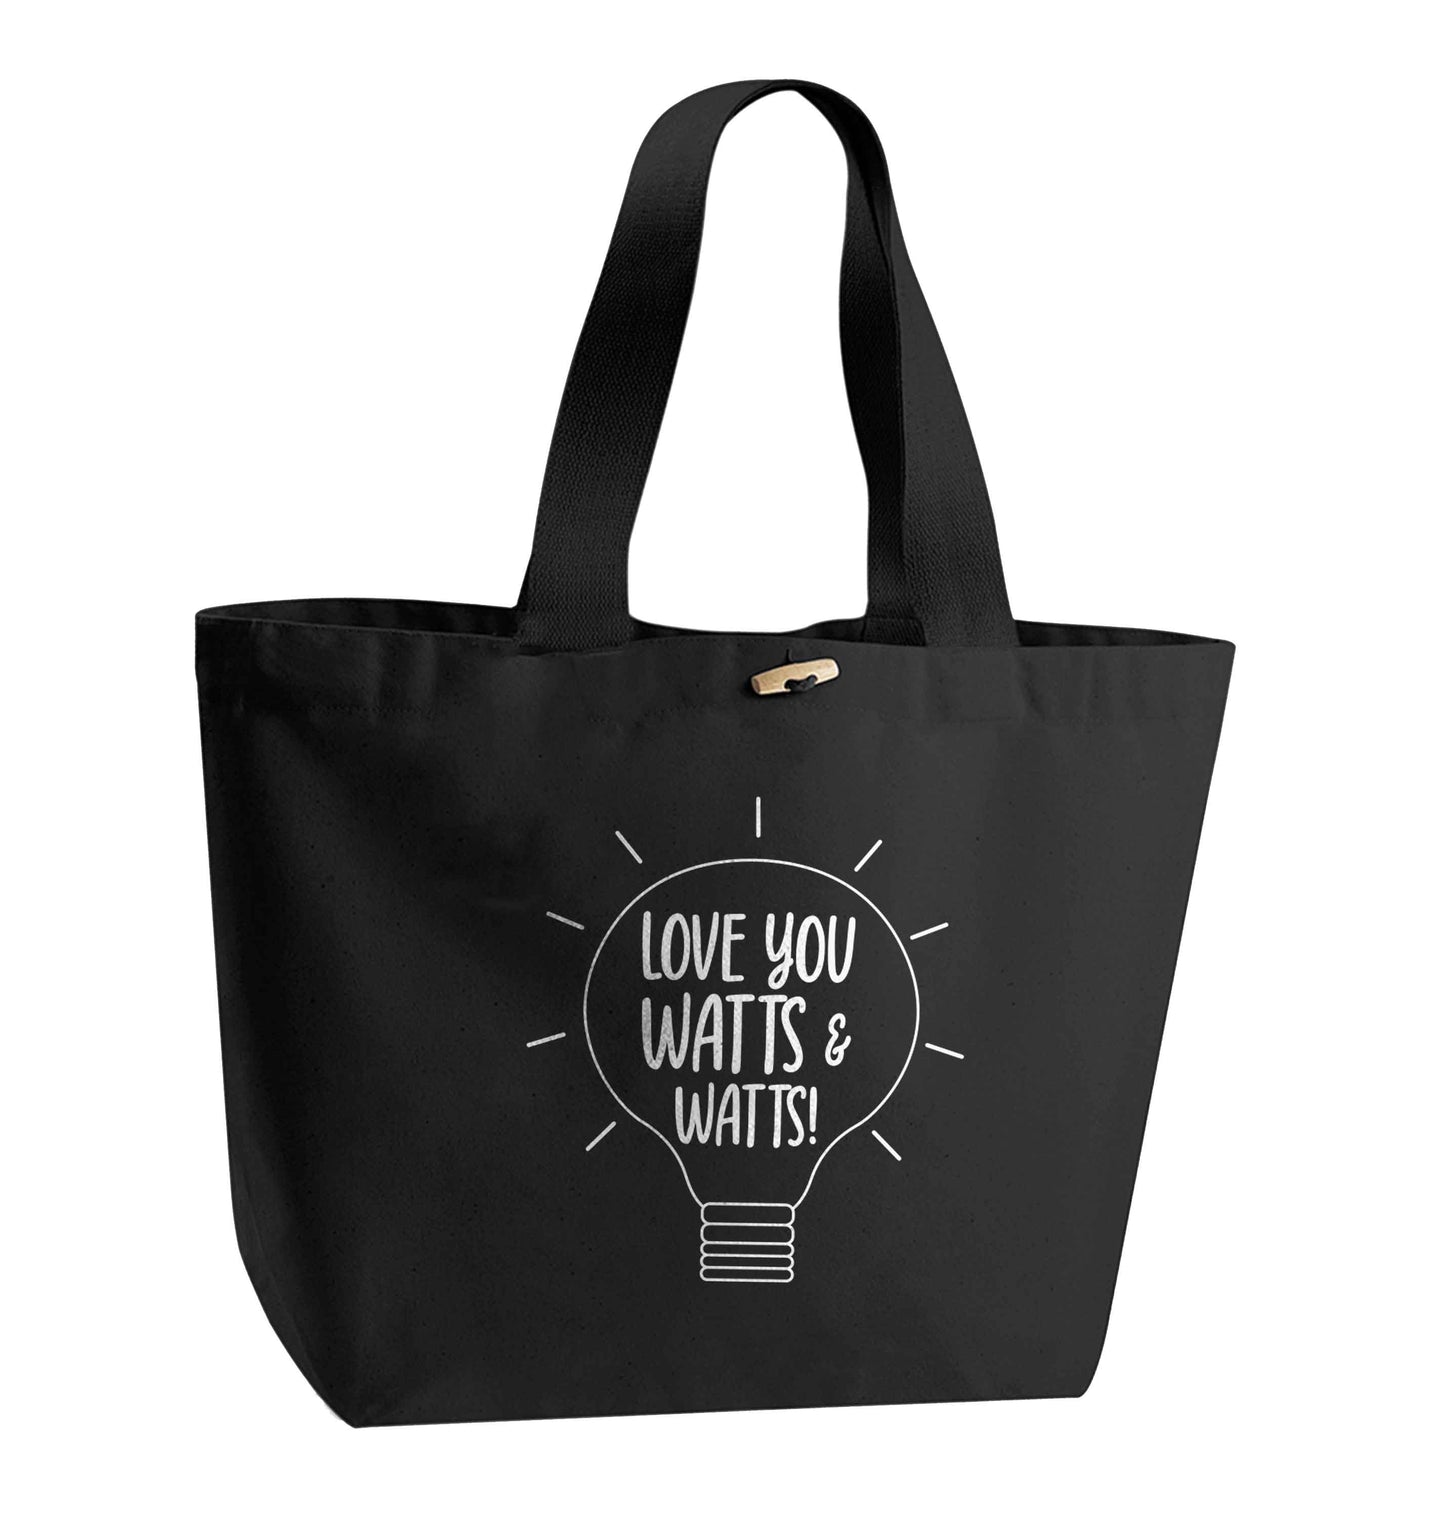 I love you watts and watts organic cotton premium tote bag with wooden toggle in black